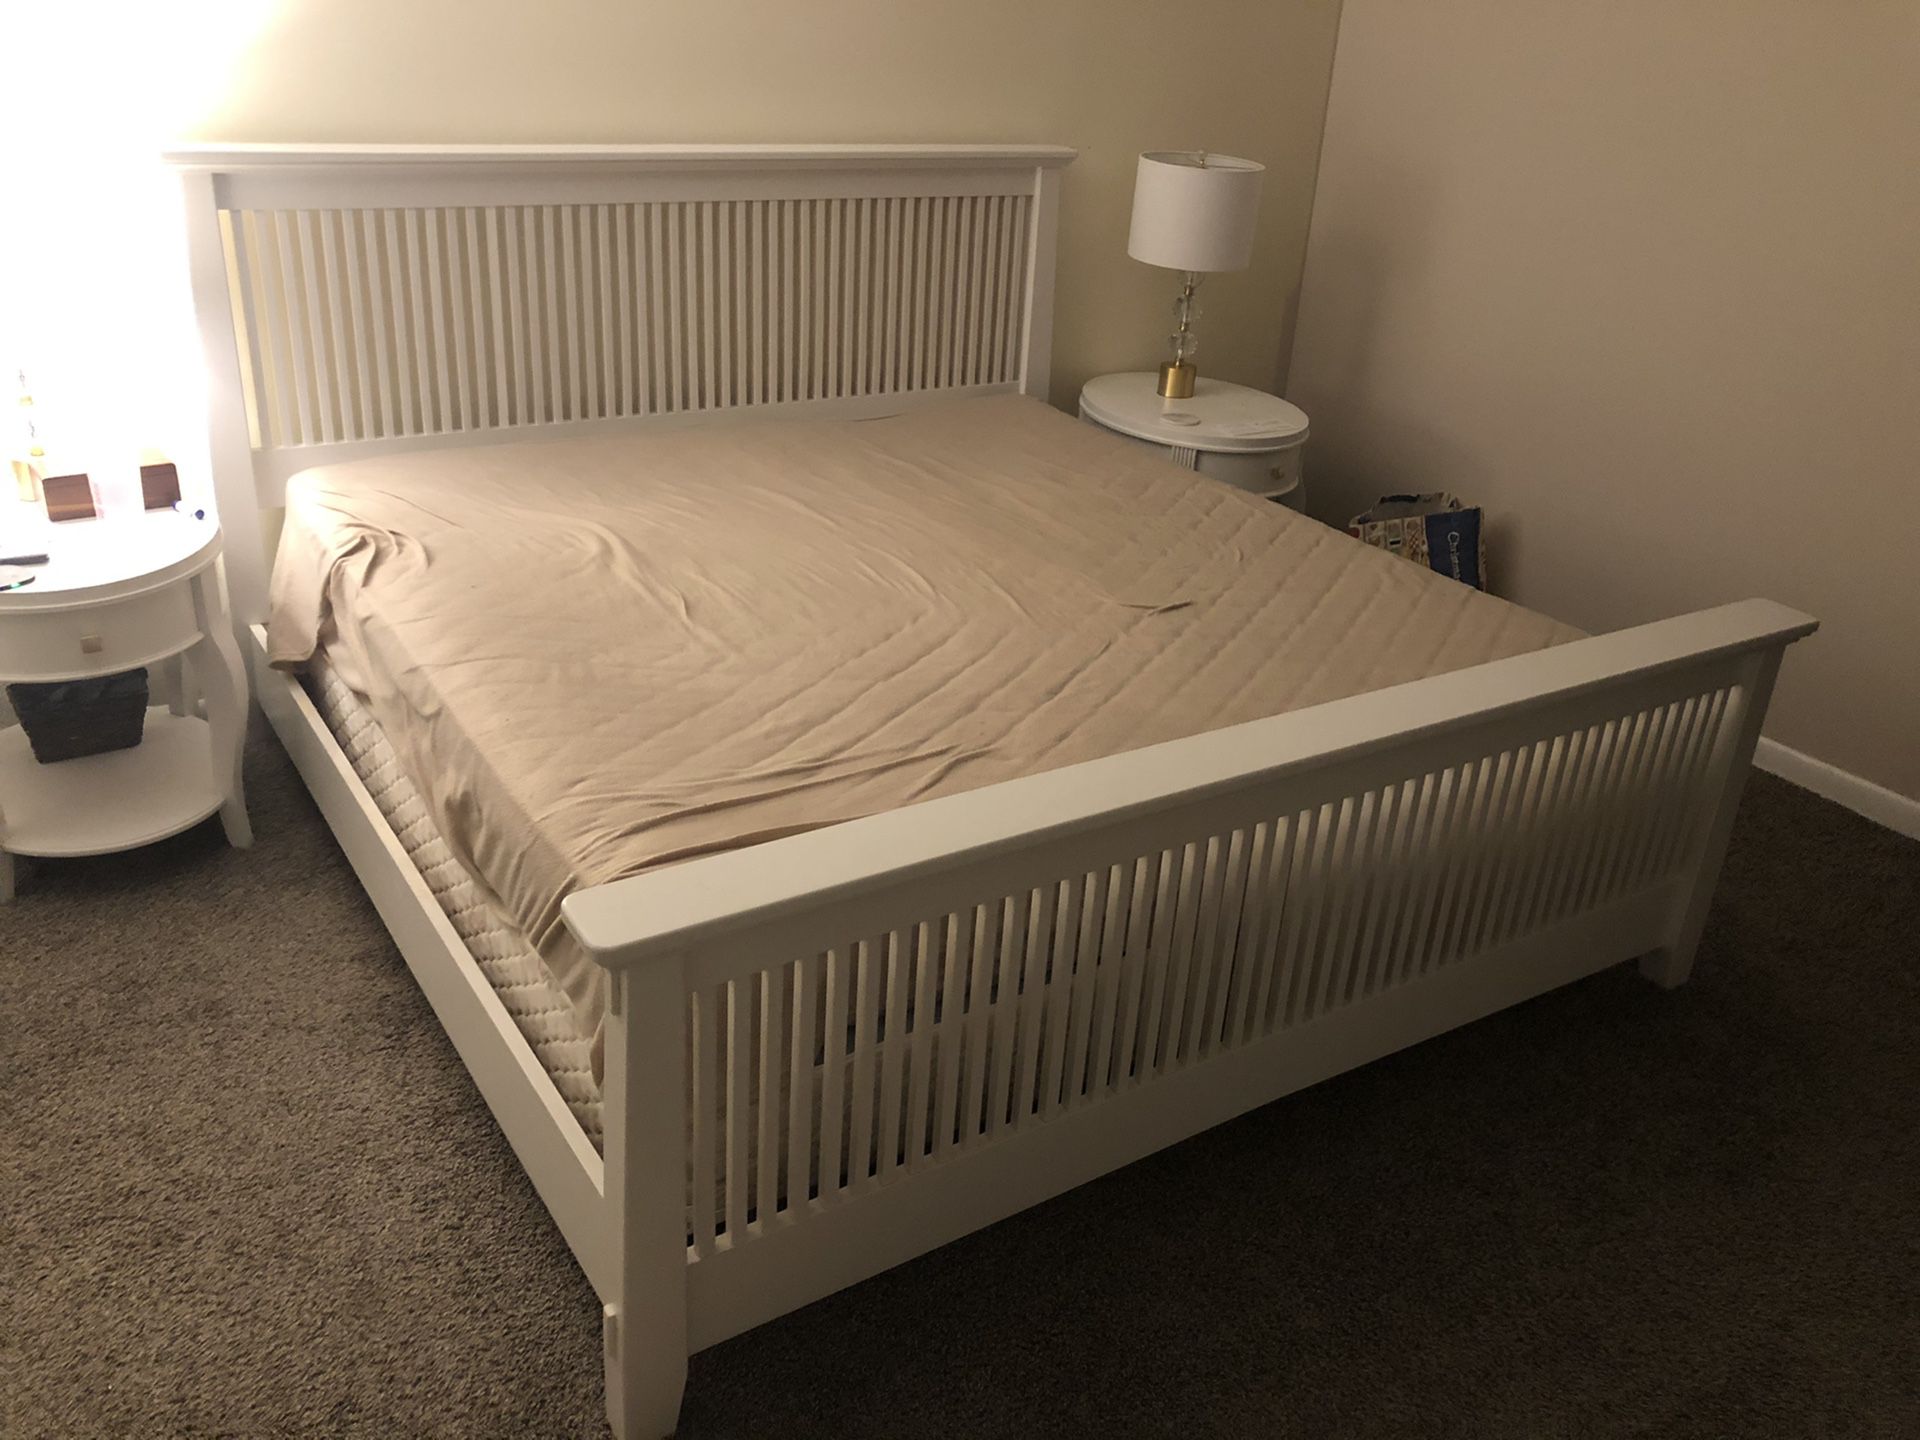 King Bed Frame and Box Springs